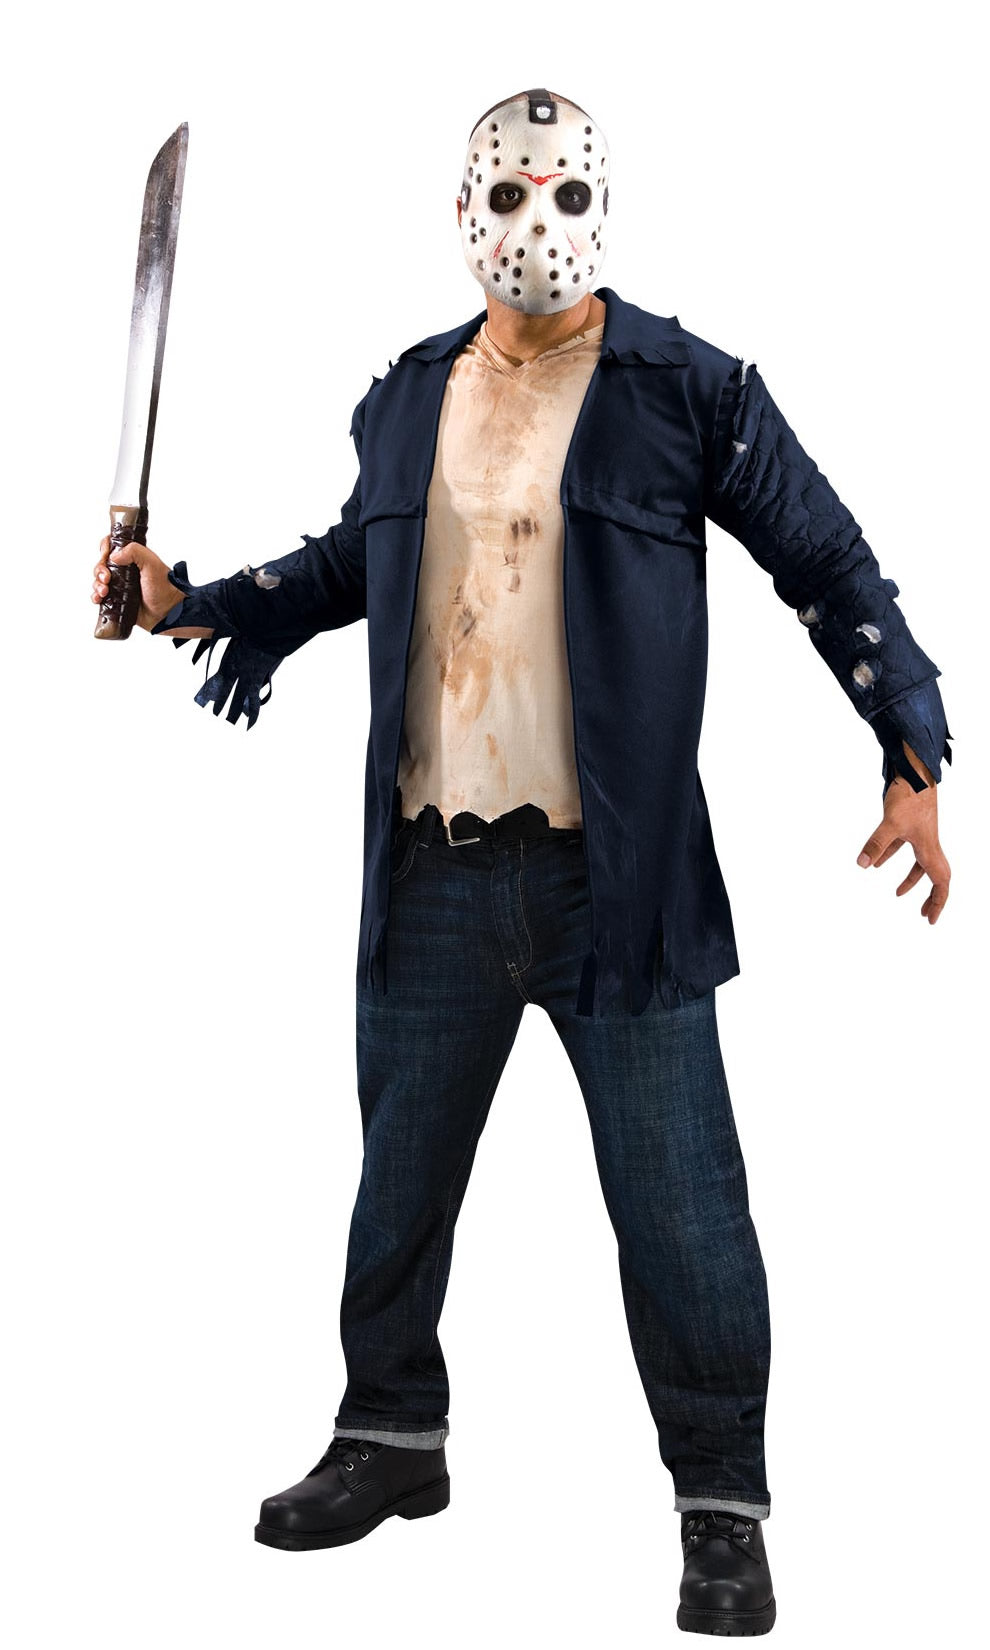 Jason Vorhees Friday 13th costume with foam mask and jacket with shirt front